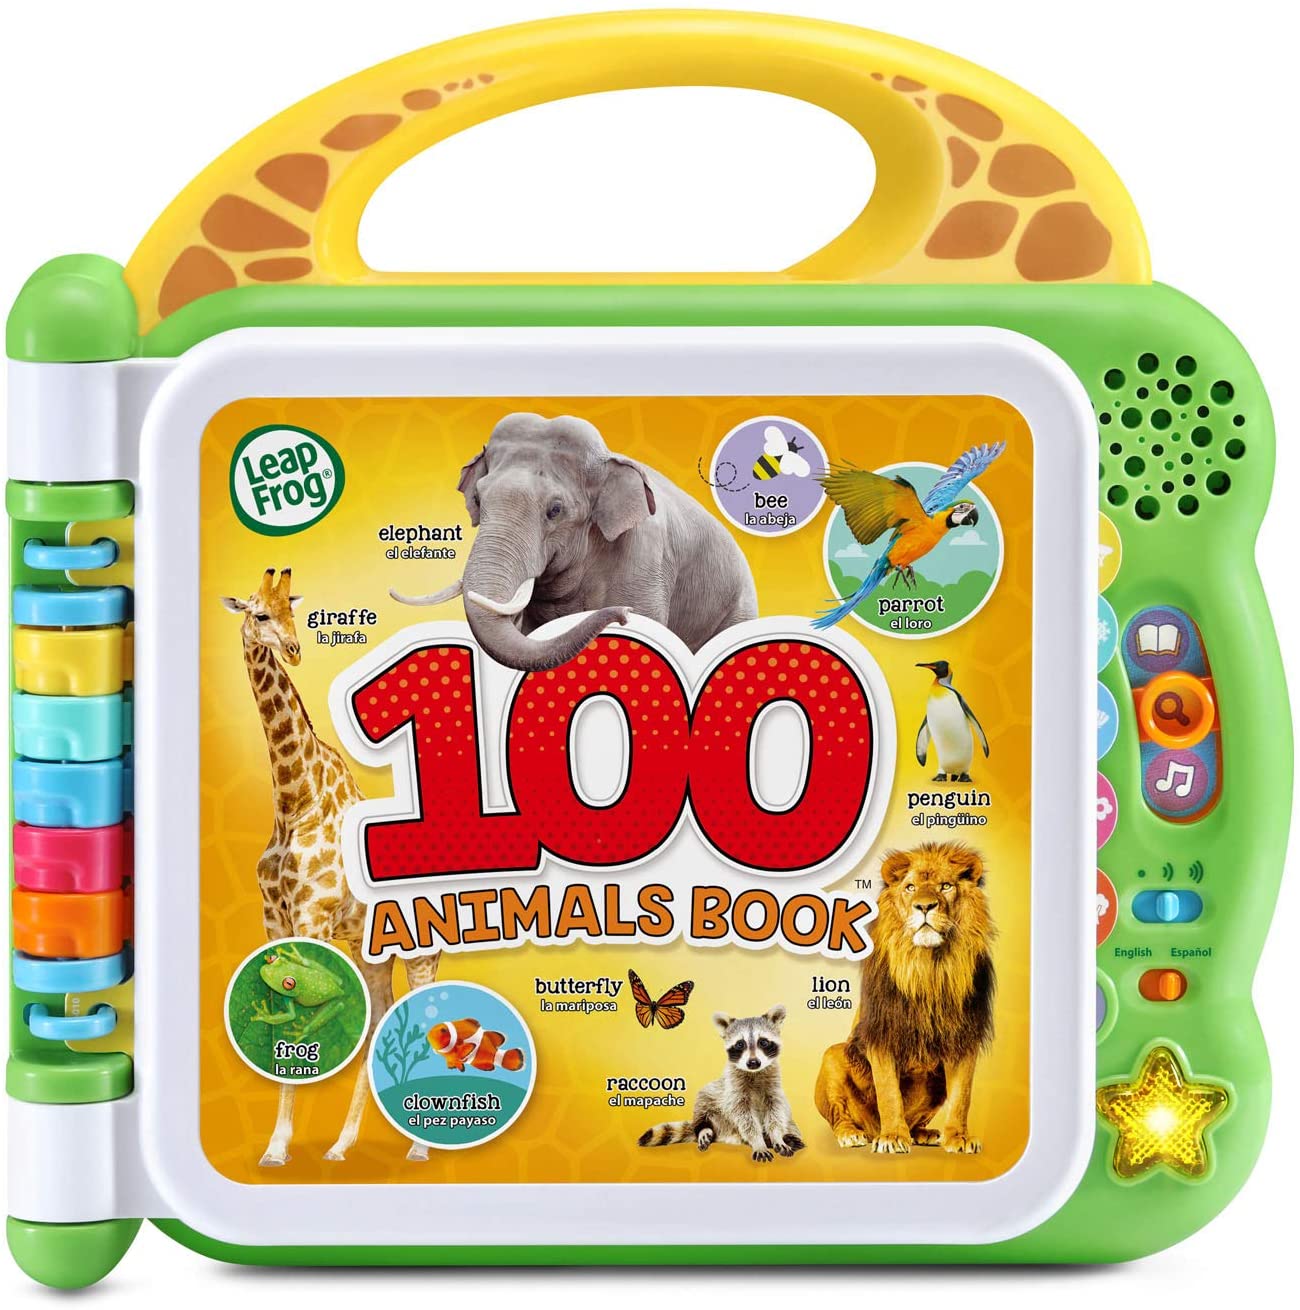 LeapFrog 100 Animals Book, Green - image 1 of 7